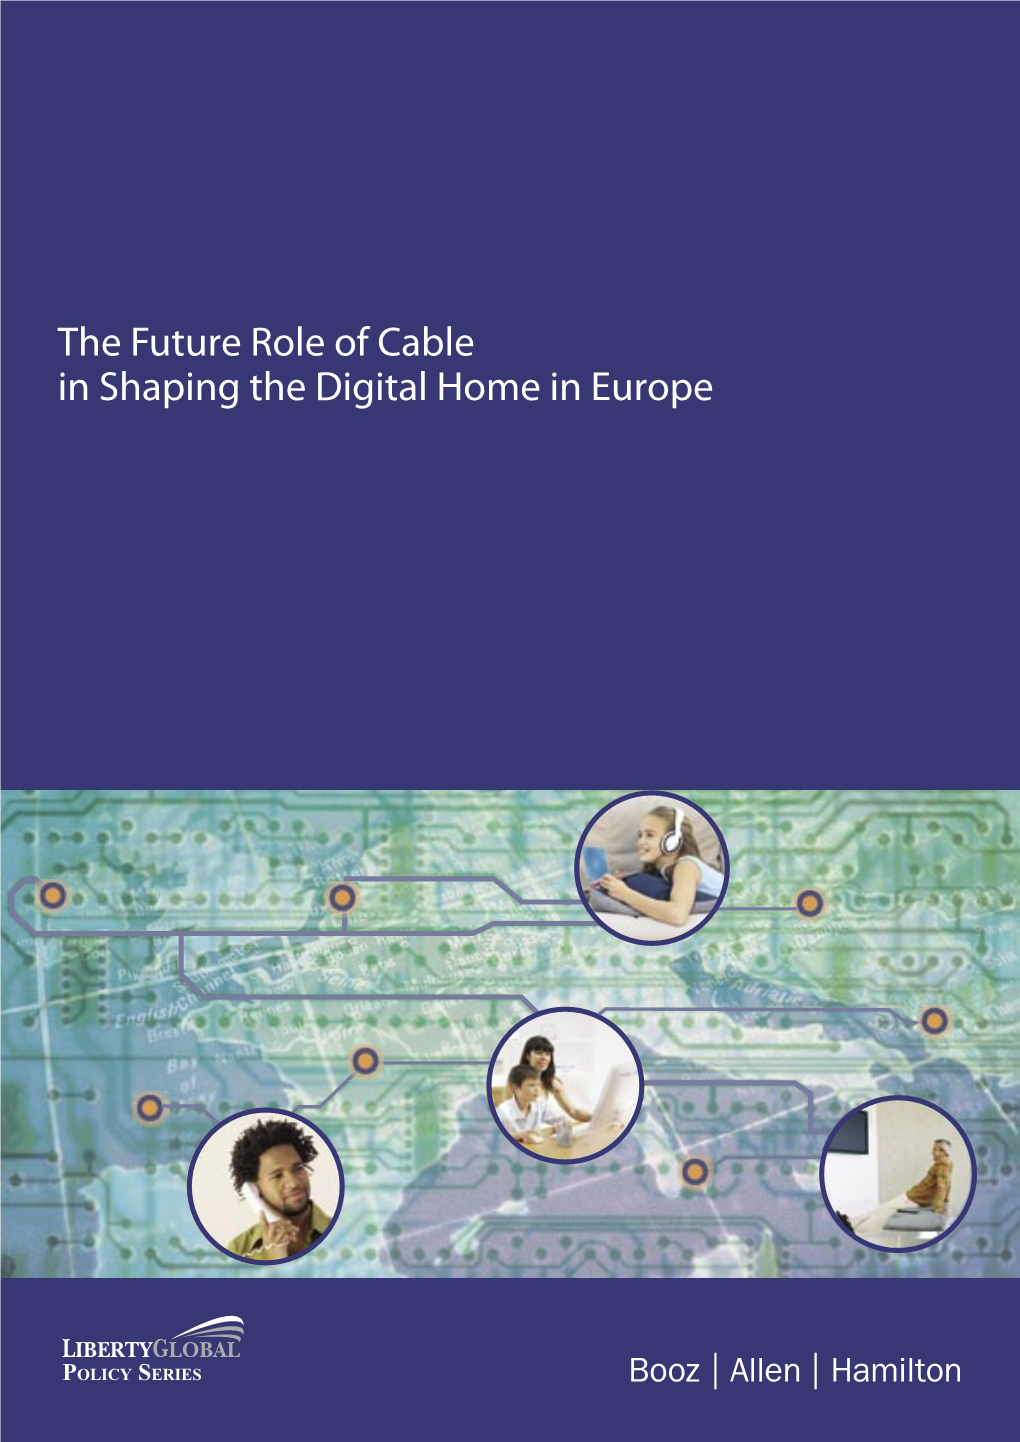 The Future Role of Cable in Shaping the Digital Home in Europe